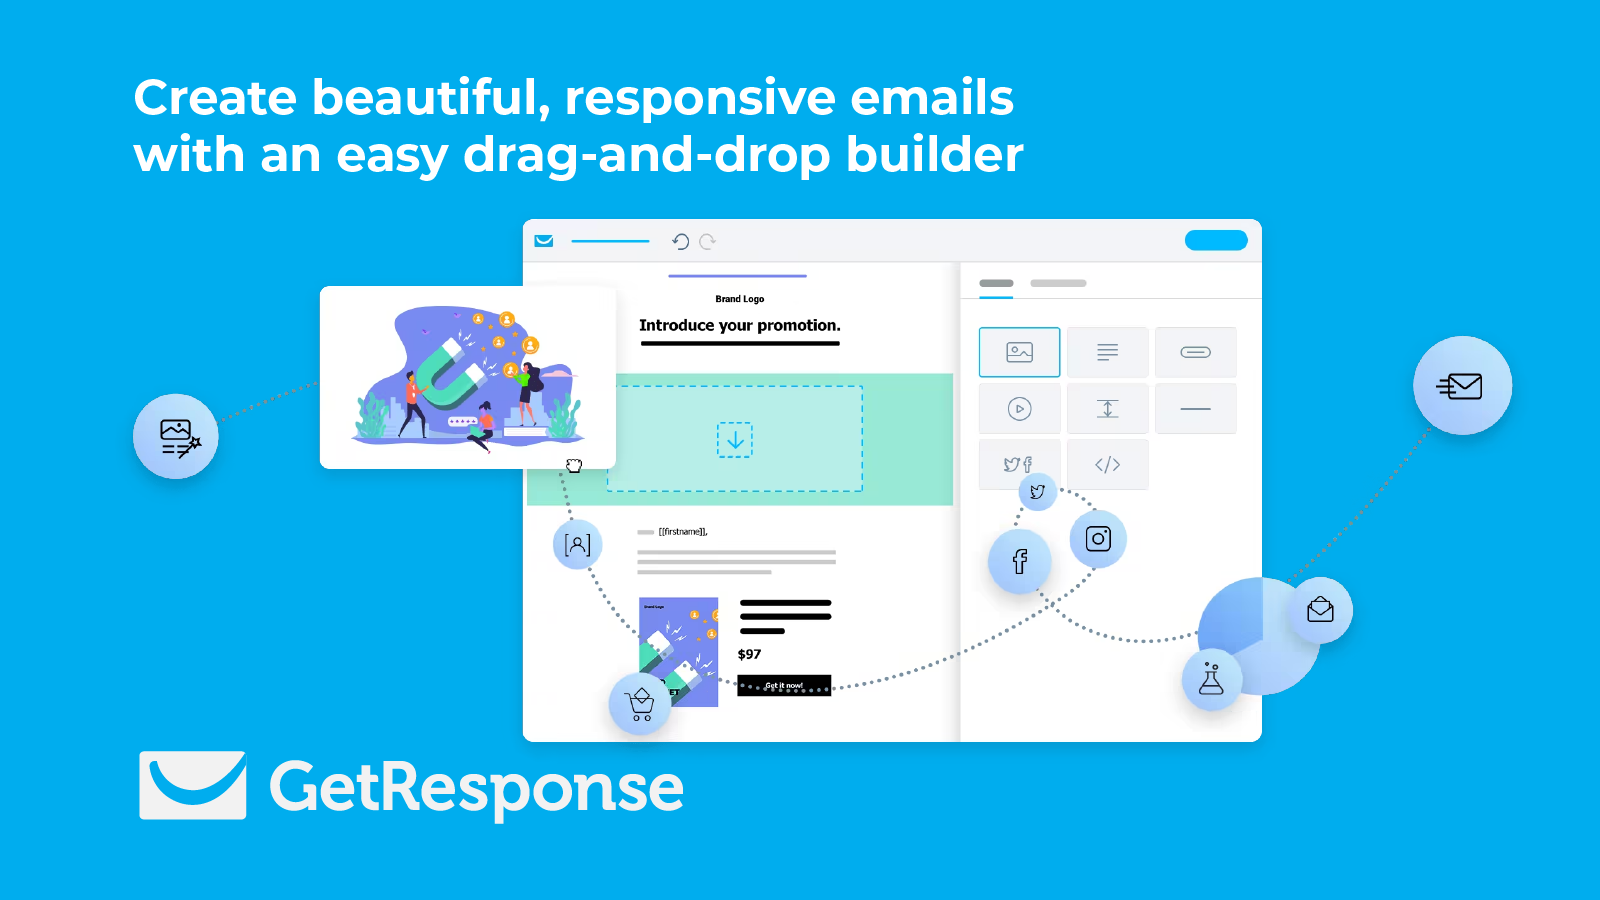 Create beautiful emails with an easy drag-and-drop builder